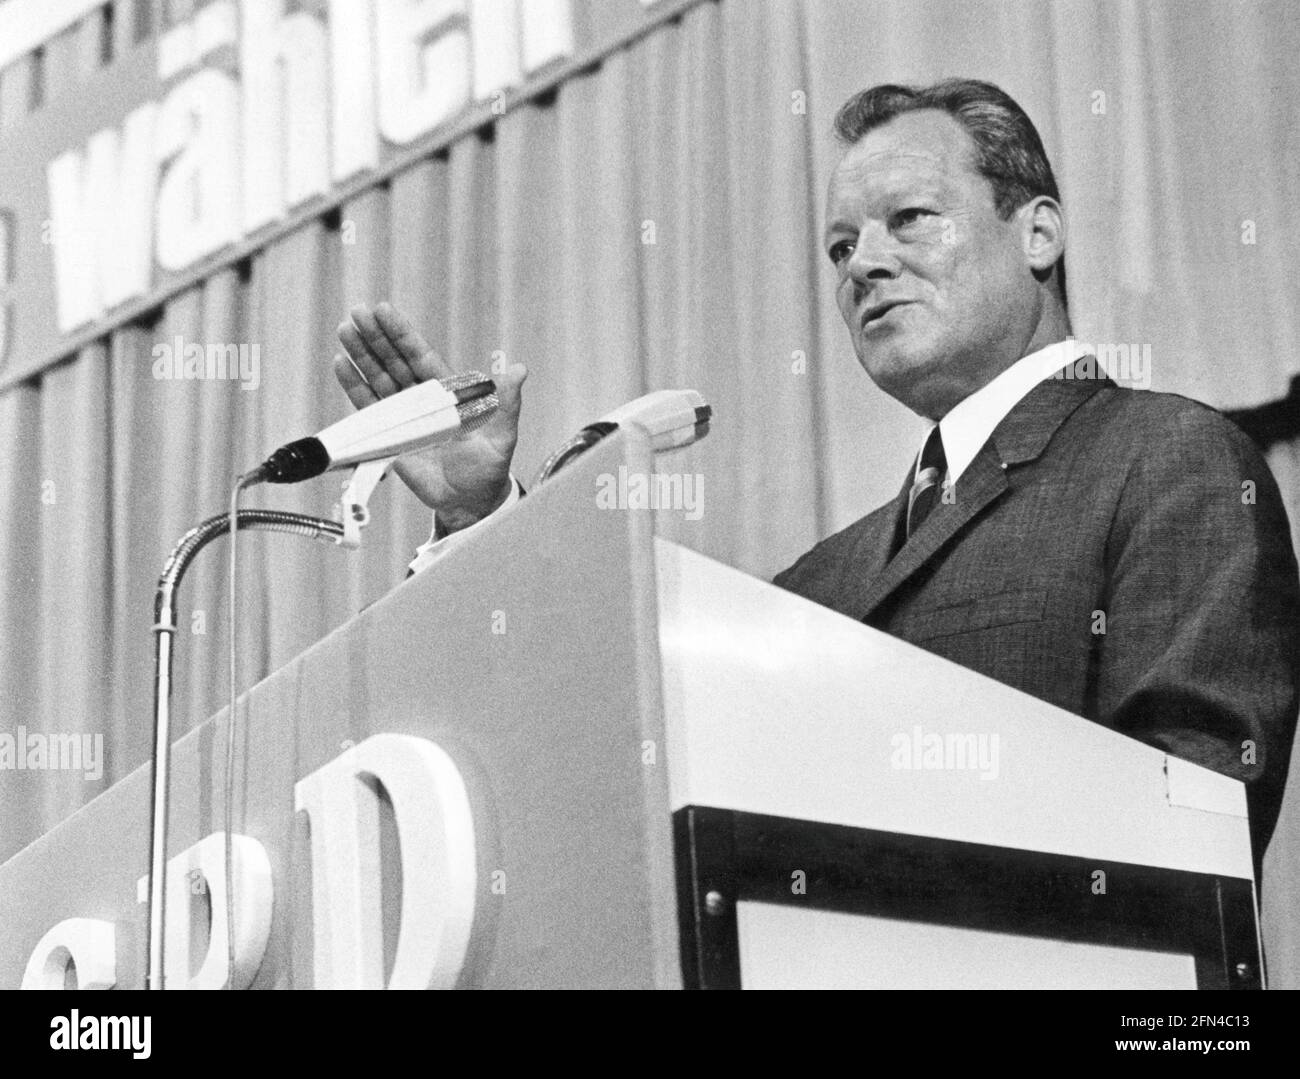 Brandt, Willy, 18.12.1913 - 8.10.1992, German politician (SPD), during an election rally, half length, ADDITIONAL-RIGHTS-CLEARANCE-INFO-NOT-AVAILABLE Stock Photo